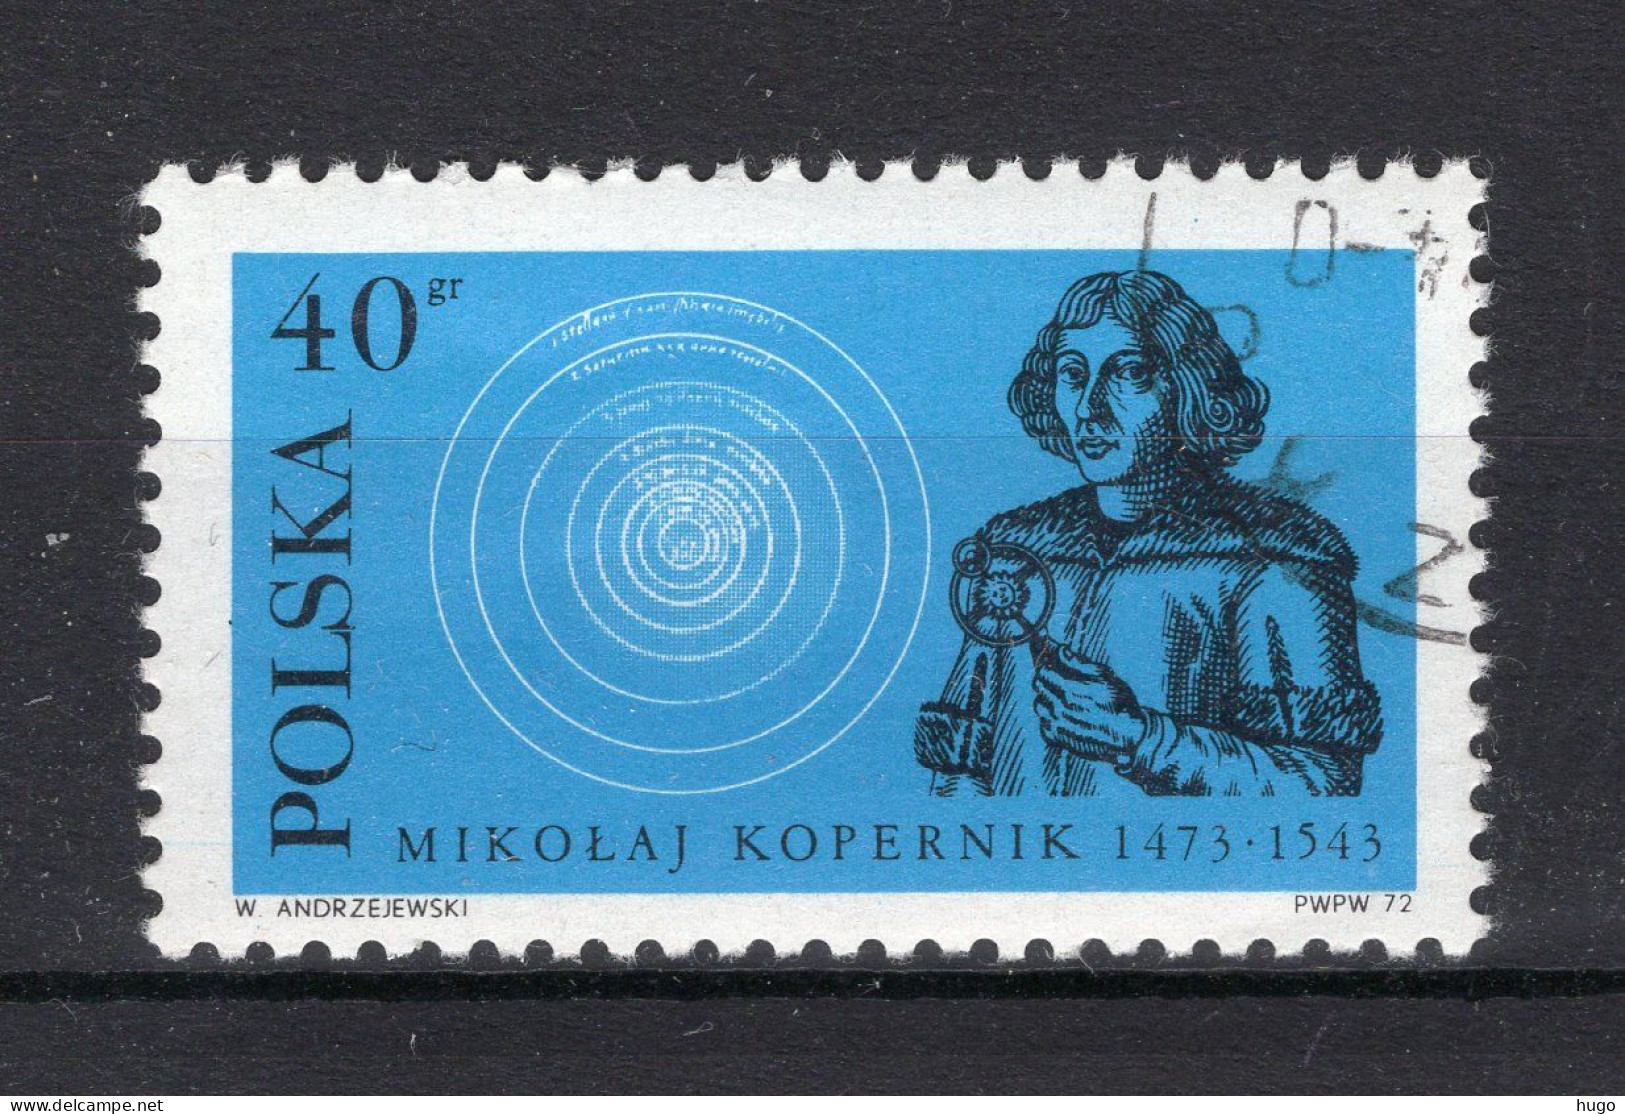 POLEN Yt. 2027° Gestempeld 1972 - Used Stamps